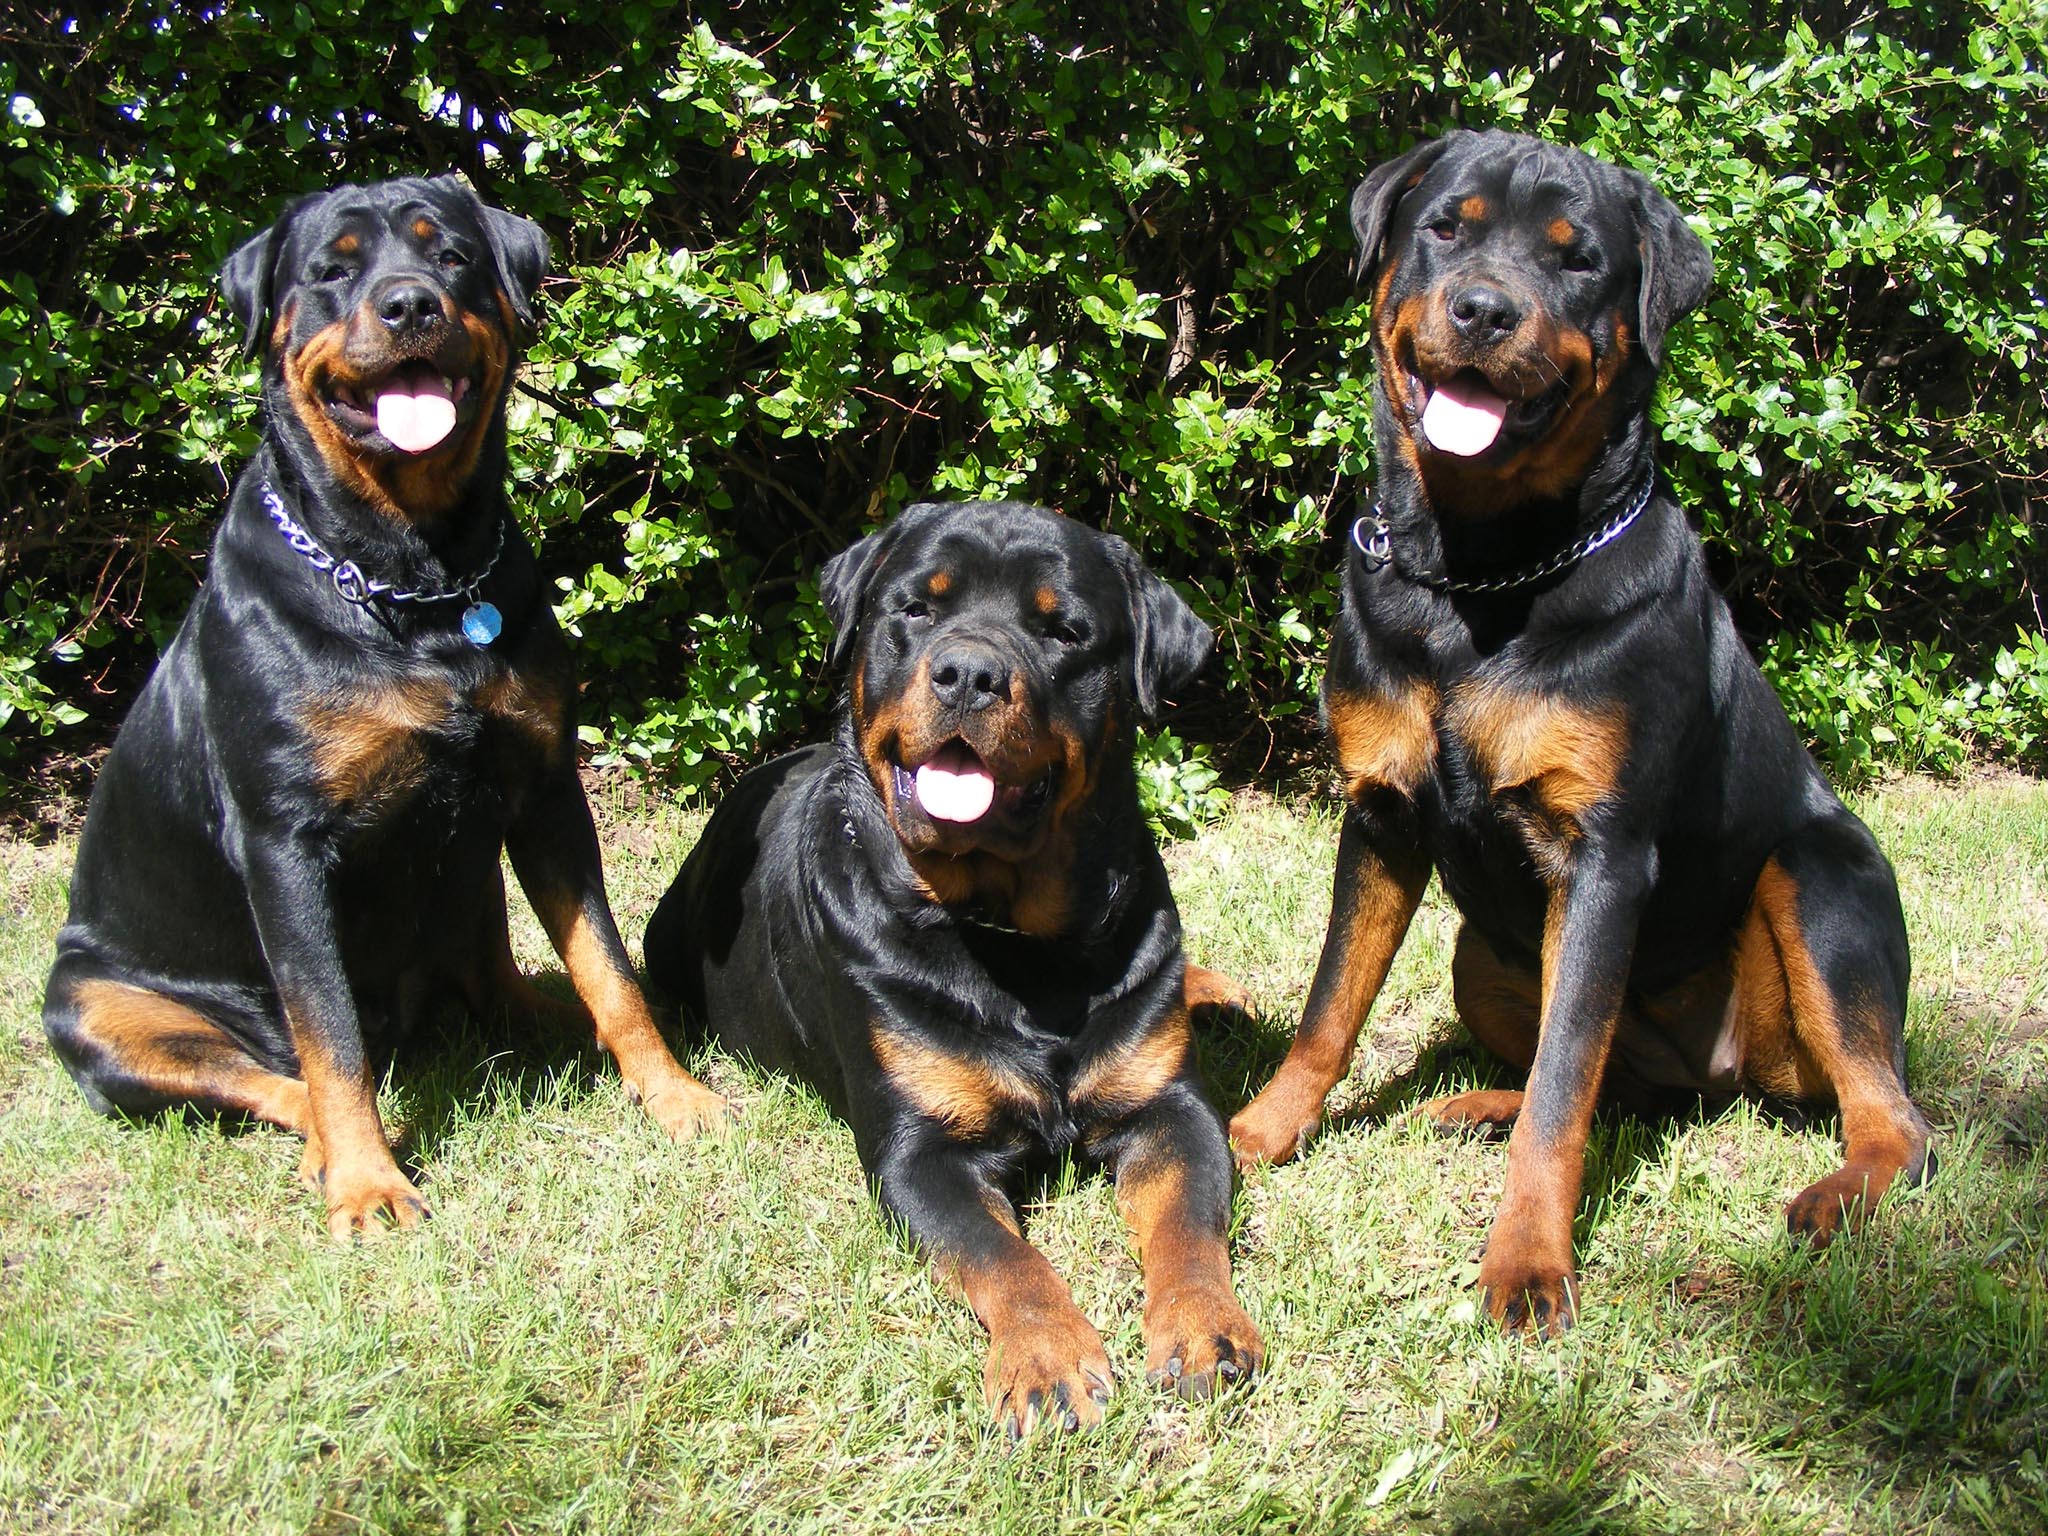 Rottweiler Dogs Hd 1080P 11 | wallpapers4k.org